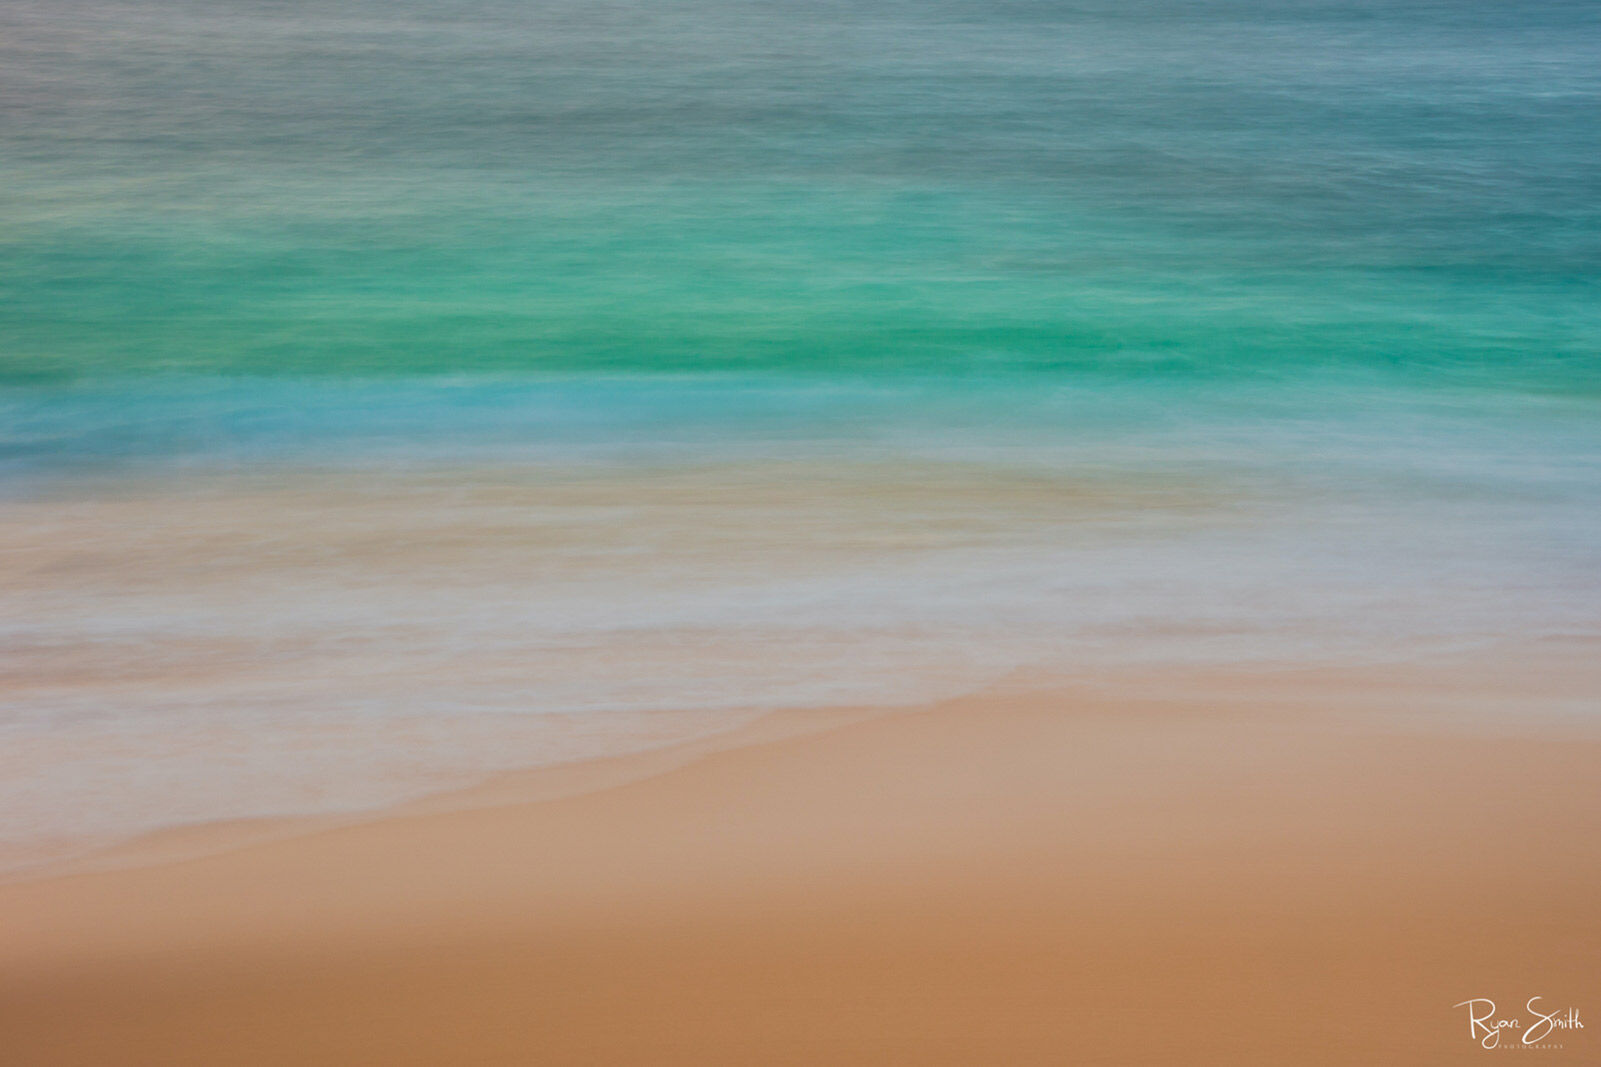 Abstract photography of the beach close up with the tan sand, shallow water and deep turquoise and blue water out further.